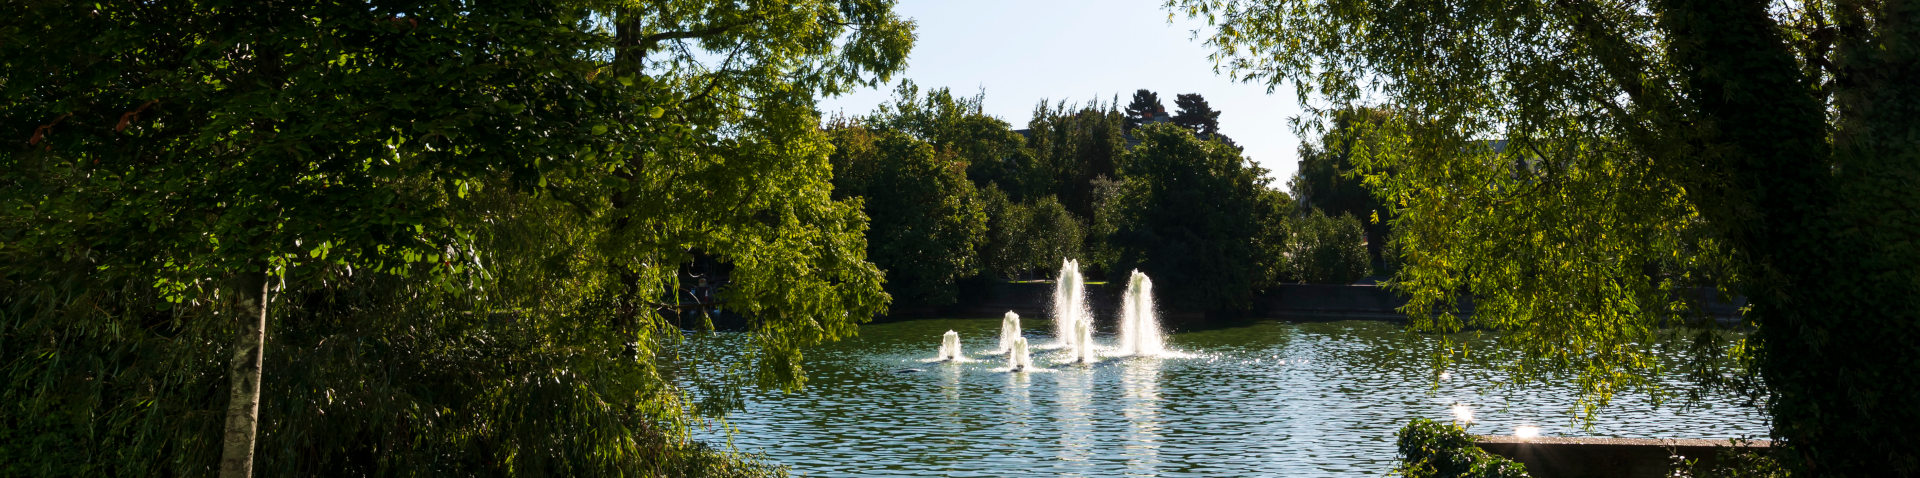 fountains in a lake